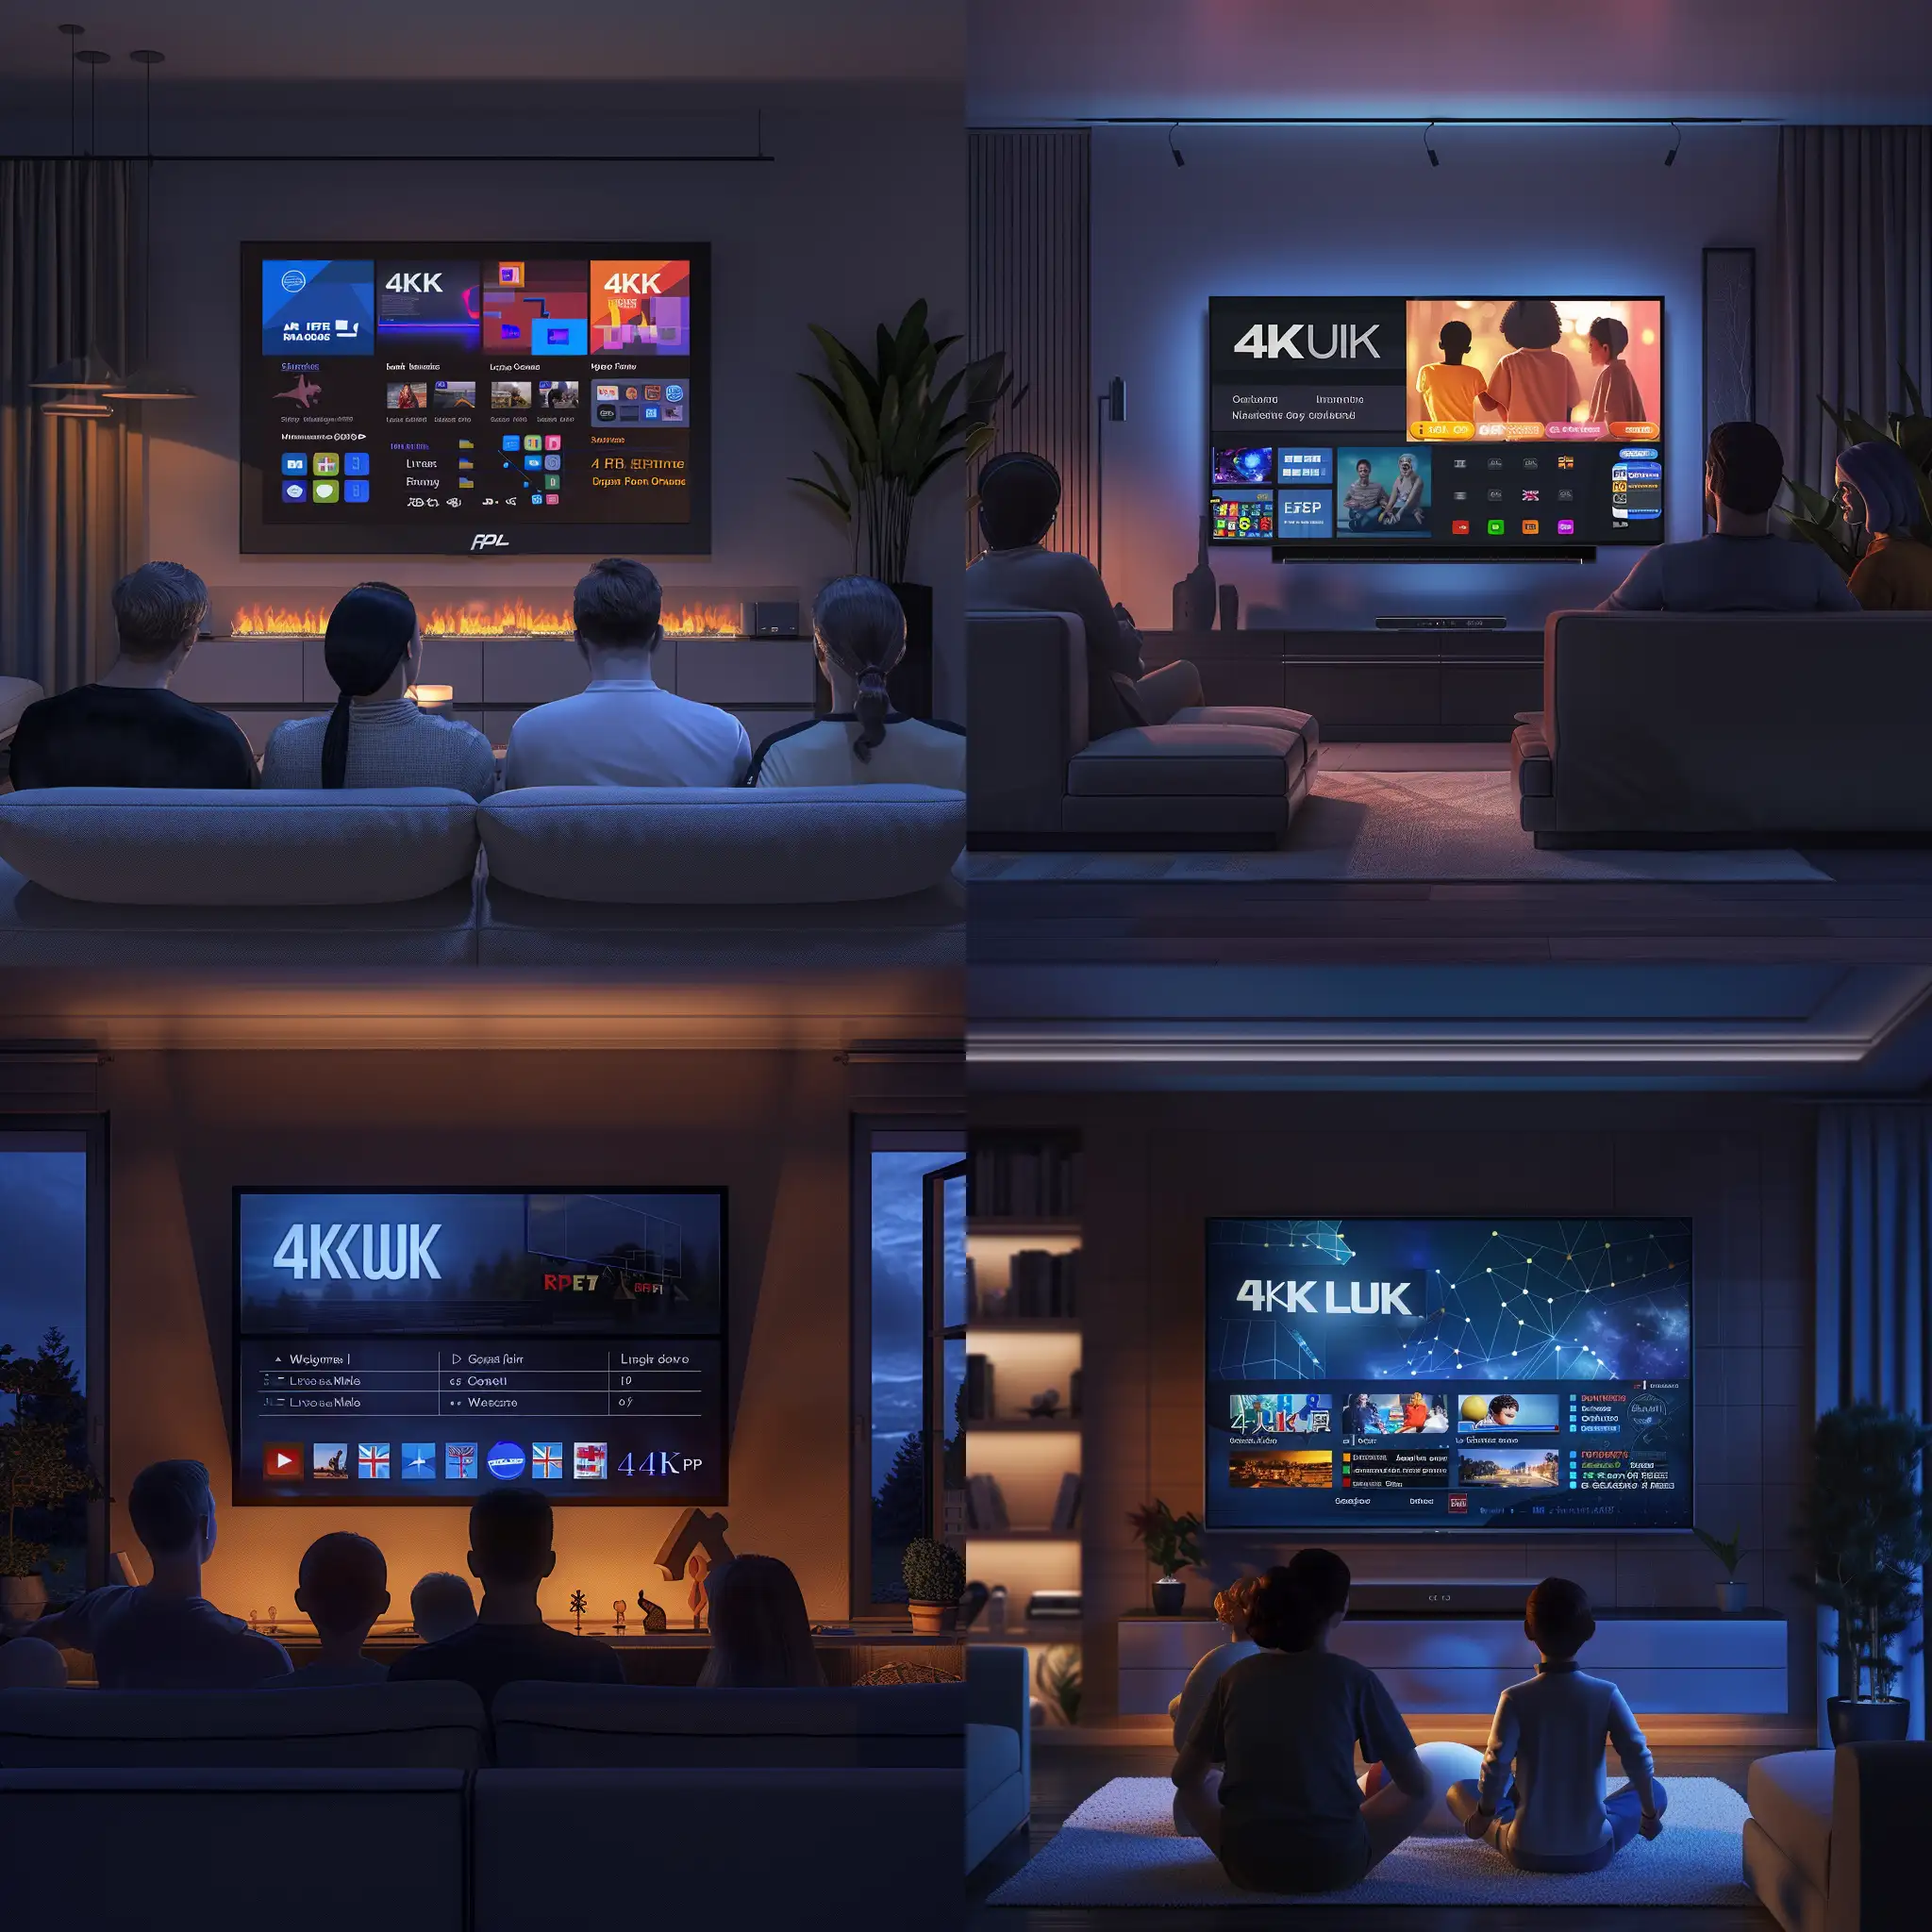 captures a tranquil family scene inside a modern living room at night, where the main source of illumination emanates from a large, vivid television screen mounted on the wall.  On the television, a user-friendly interface branded '4KUK' showcases a selection of multimedia content. There are options for IPTV, with clear, brightly colored tiles for different programs and features such as sports, movies, and live events. the  television layer must be super realistic. Must have realistic well know iptv player